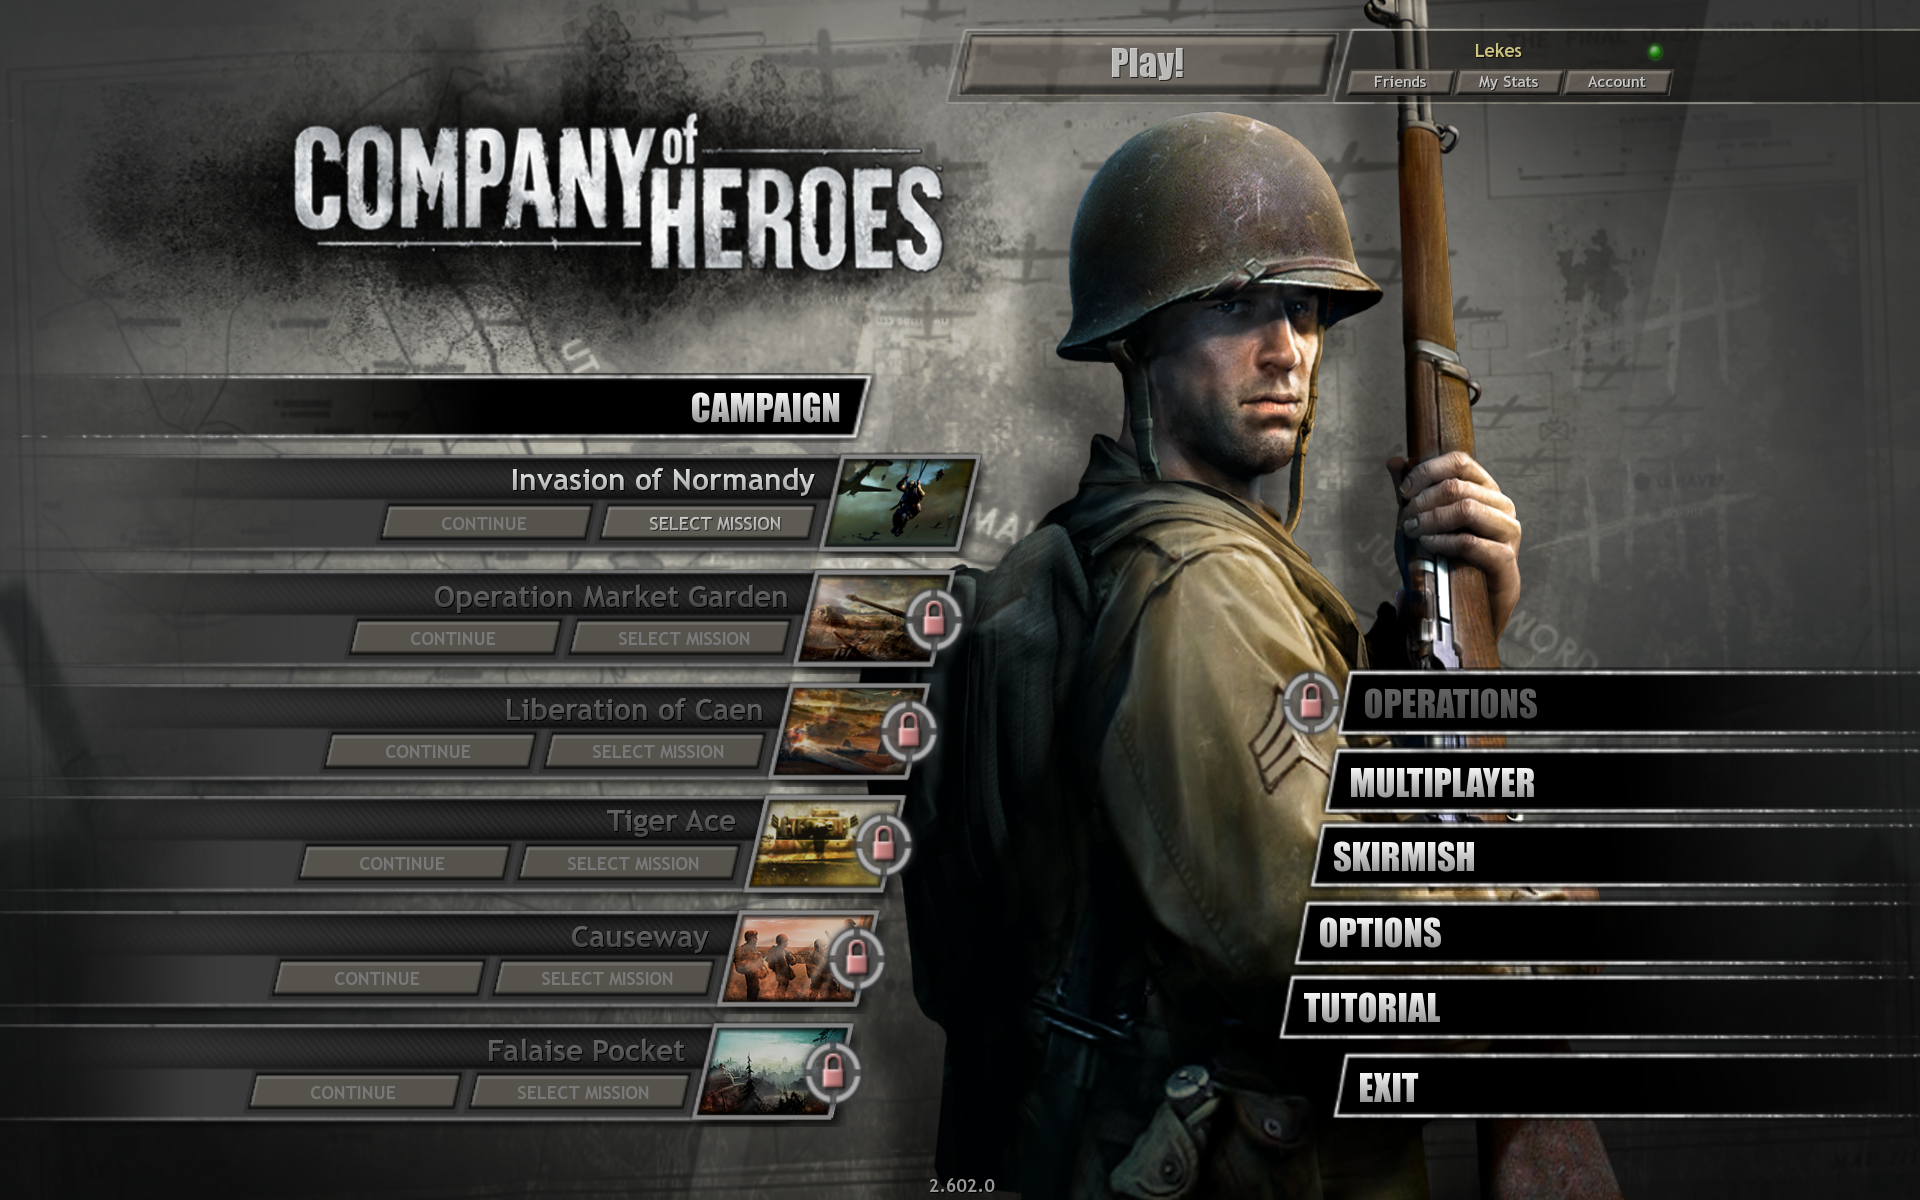 Company of heroes механик. Company of Heroes 1 меню. Company of Heroes 3 диск. Company of Heroes 2 главное меню. Company of Heroes Tales of Valor 2.